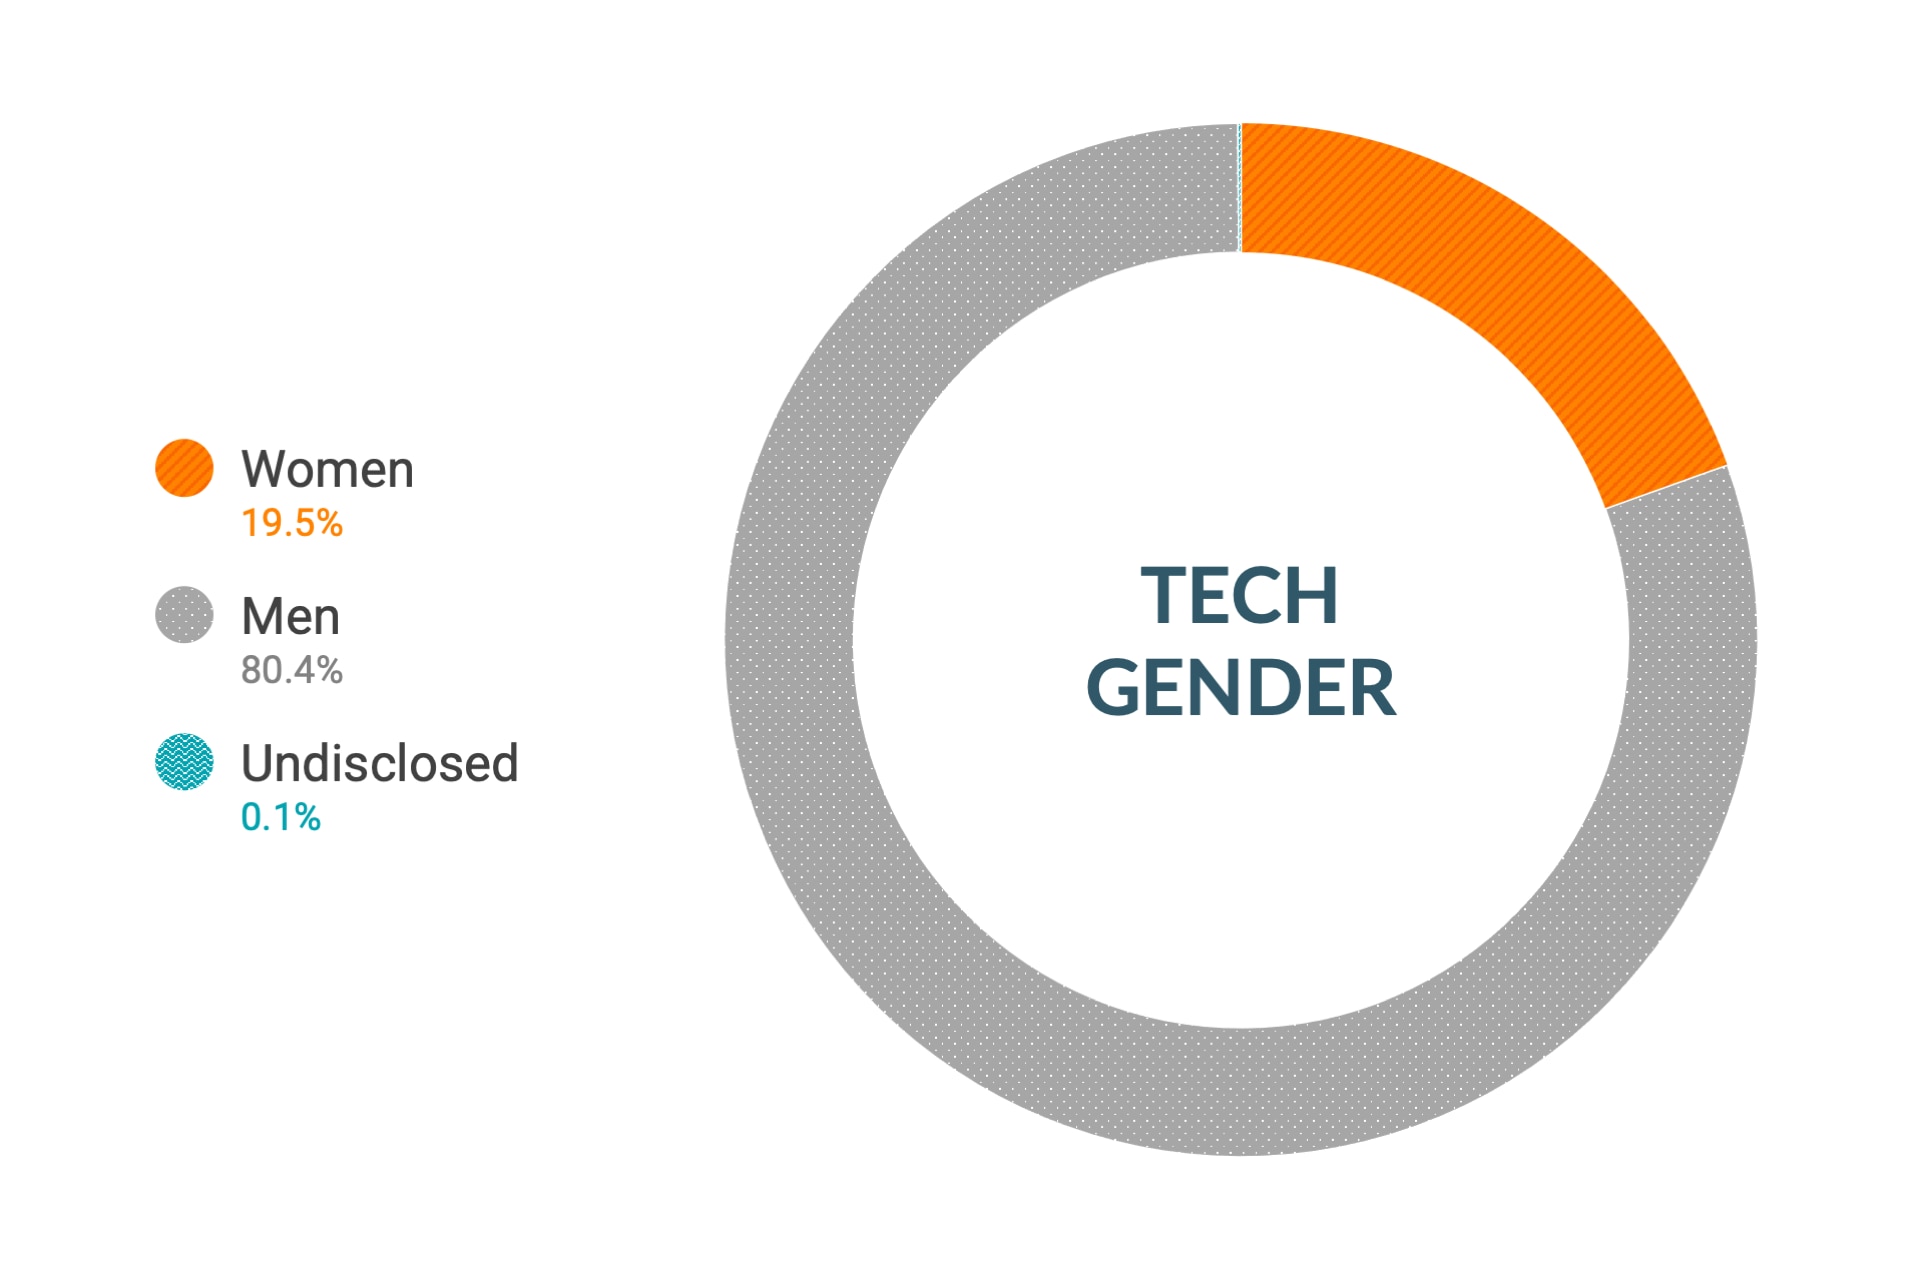 Cloudera Diversity and Inclusion data for Gender in Global Technical and Engineering Roles Roles: Women 16%, Men 83.9%, Undisclosed 0.1%